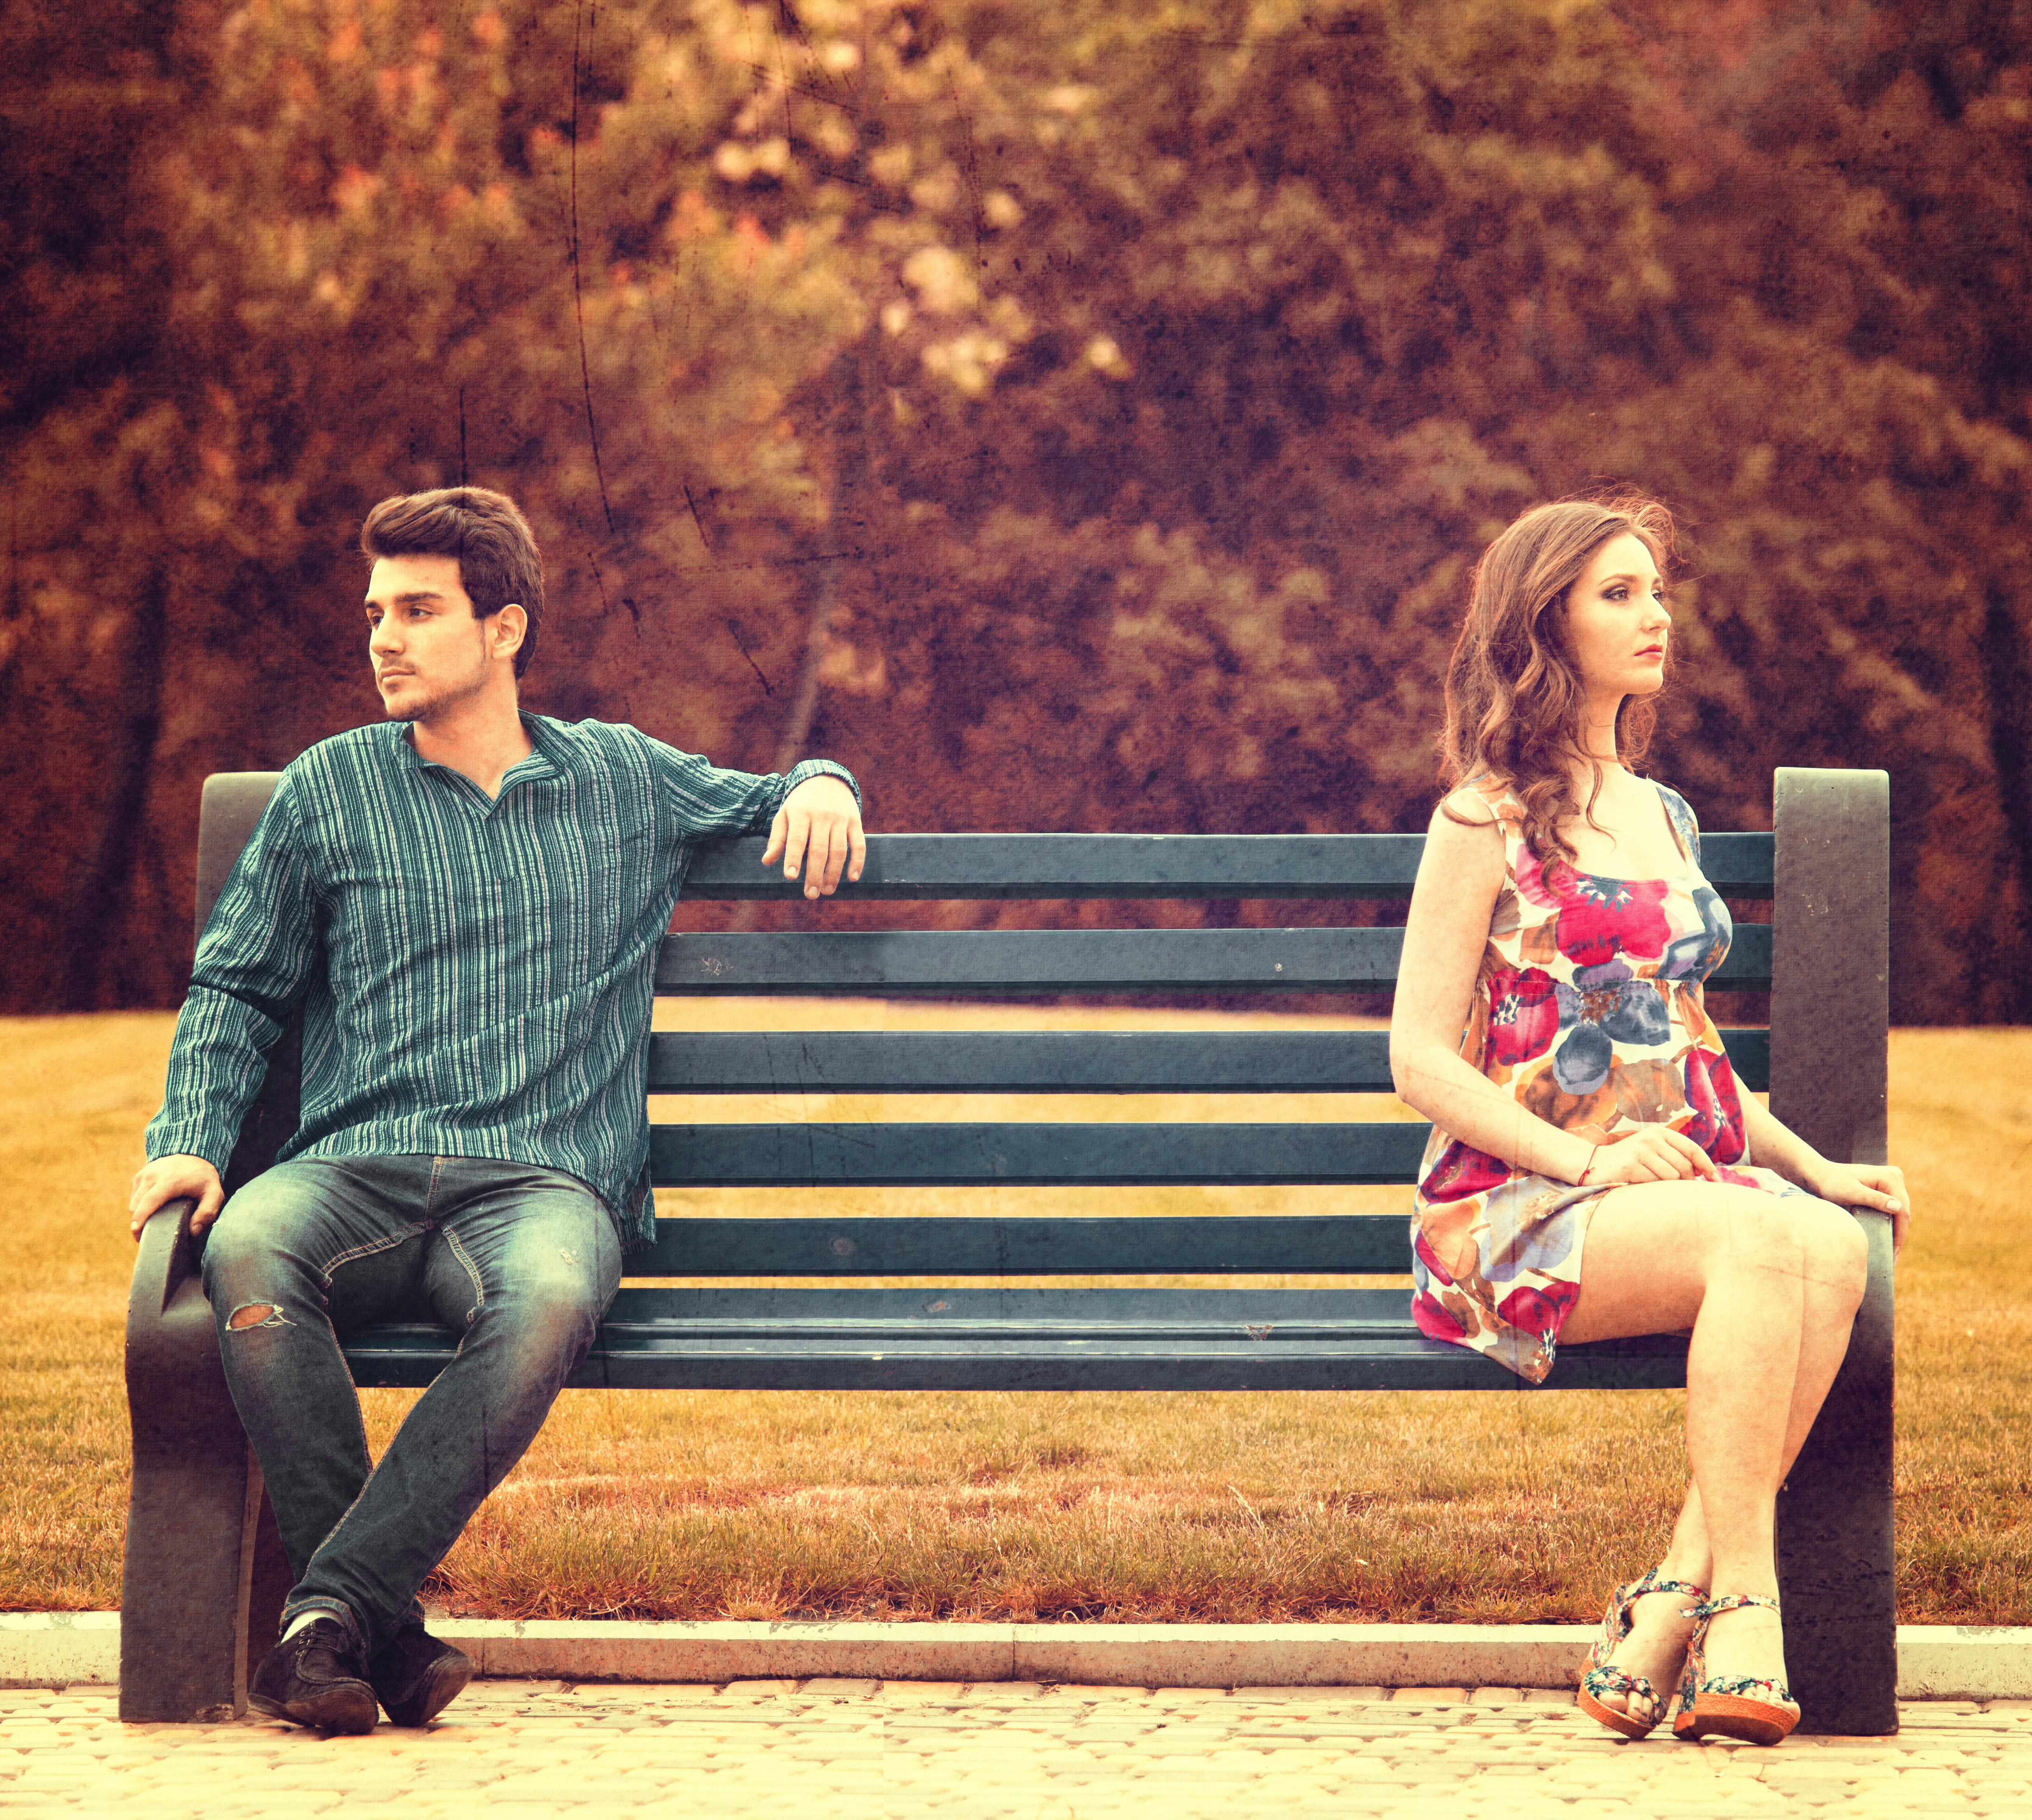 A young couple sitting apart on a park bench | Source: Shutterstock